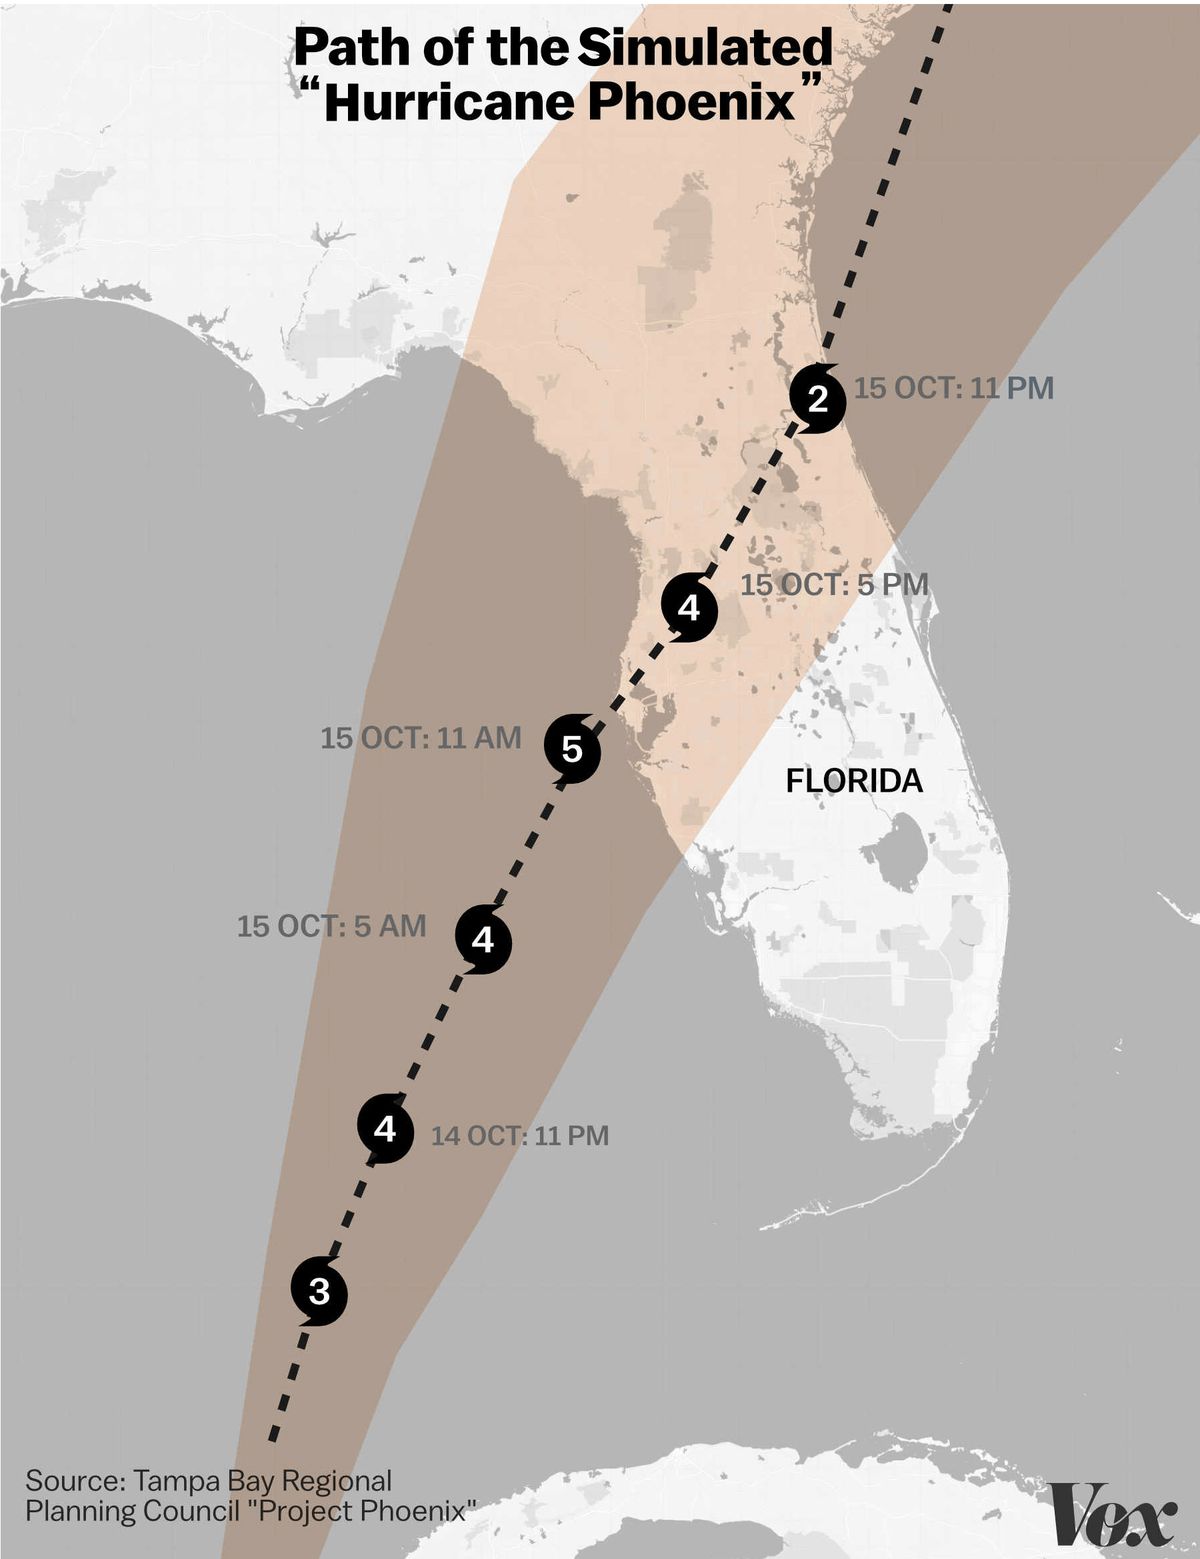 A graphic showing the path of a simulated “Hurricane Phoenix” intensifying as it reaches the Tampa Bay region of Florida.